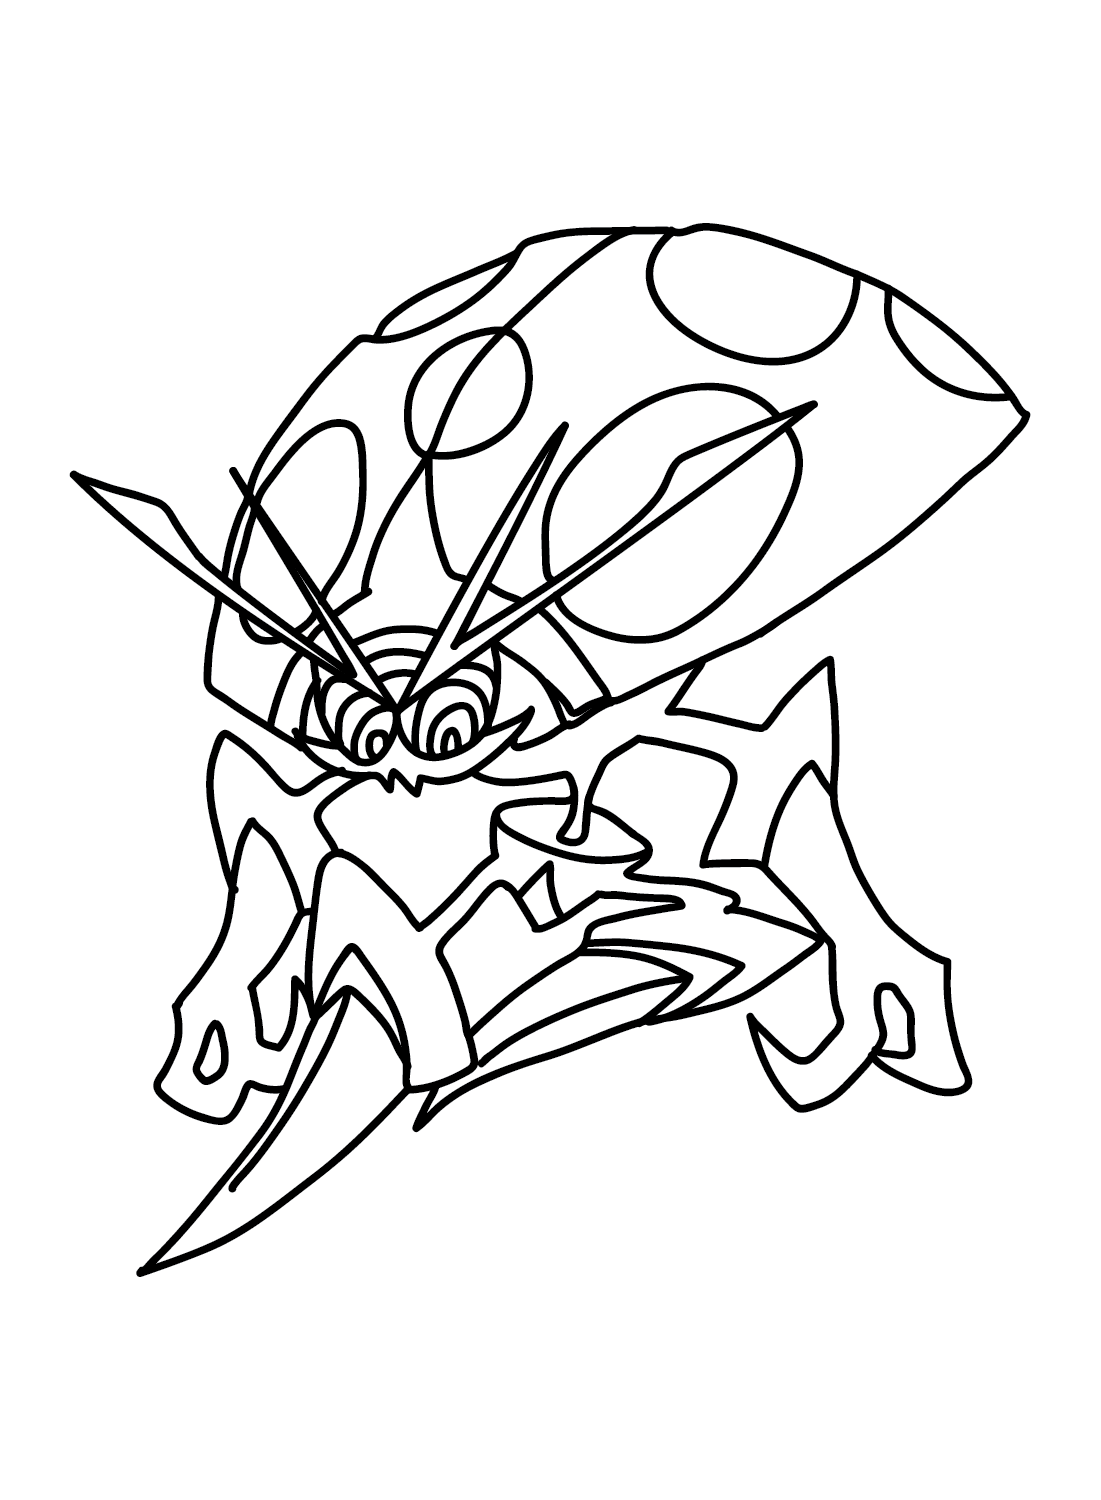 The Orbeetle Pokemon Coloring Page